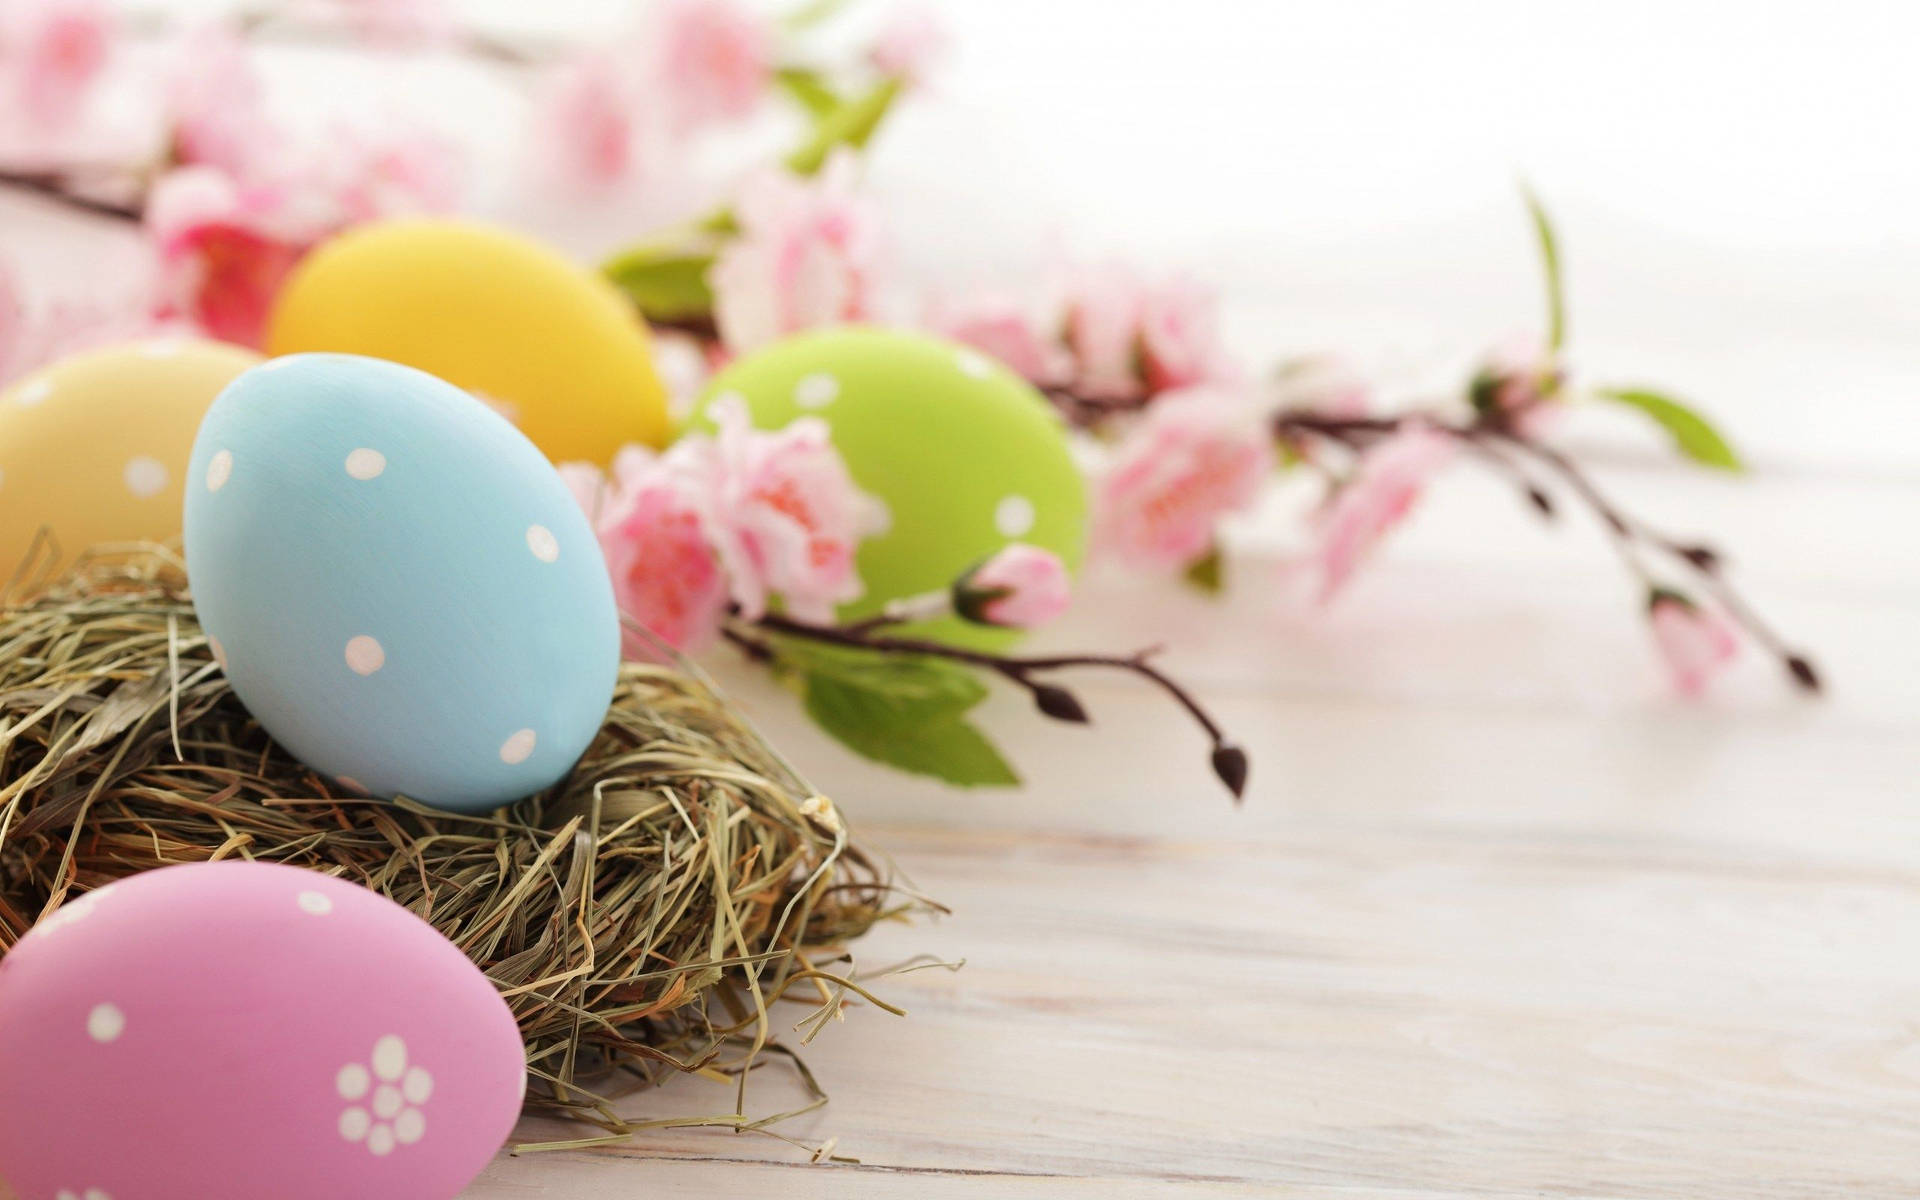 Decorative Easter Eggs Make a Unique and Beautiful Easter Display Wallpaper